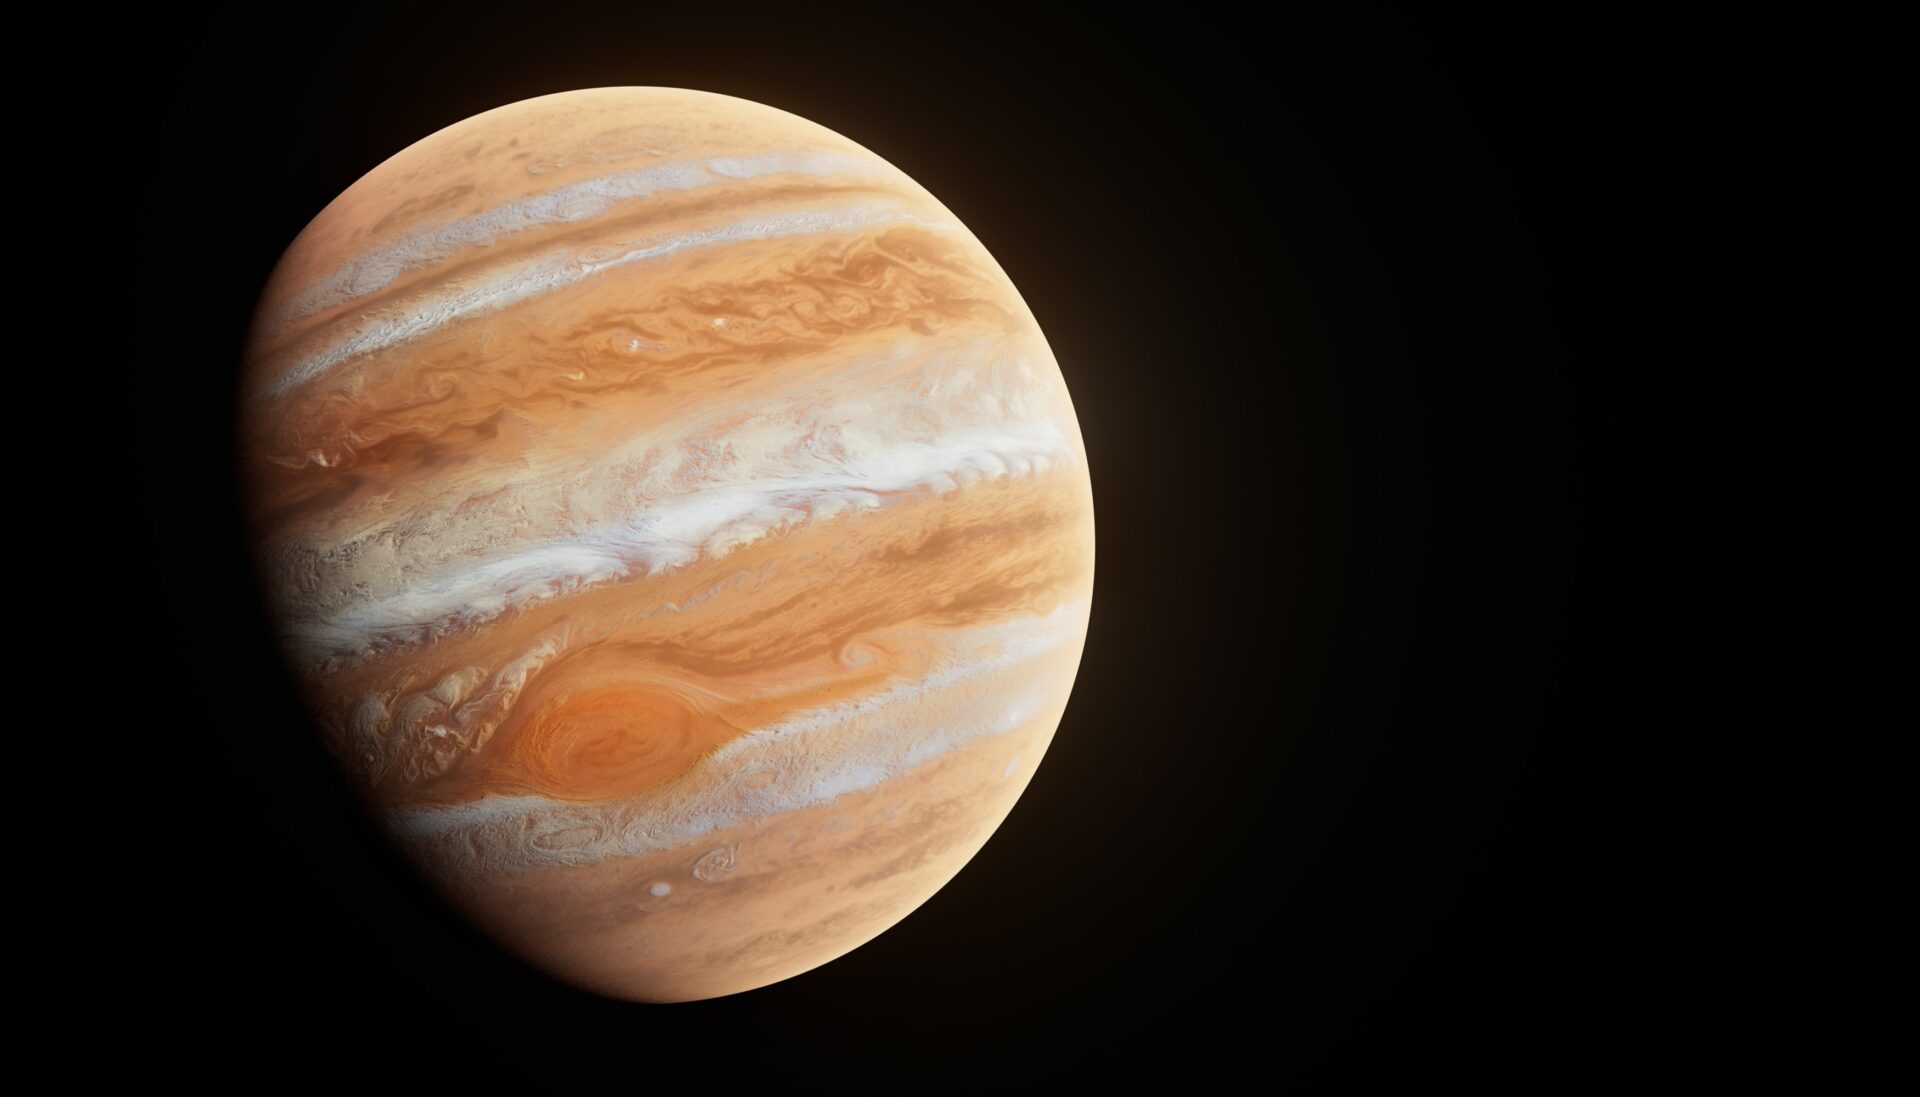 The two new planets are the size of Jupiter, in our own galaxy. Illustration of Jupiter by Planet Volumes courtesy of Unsplash